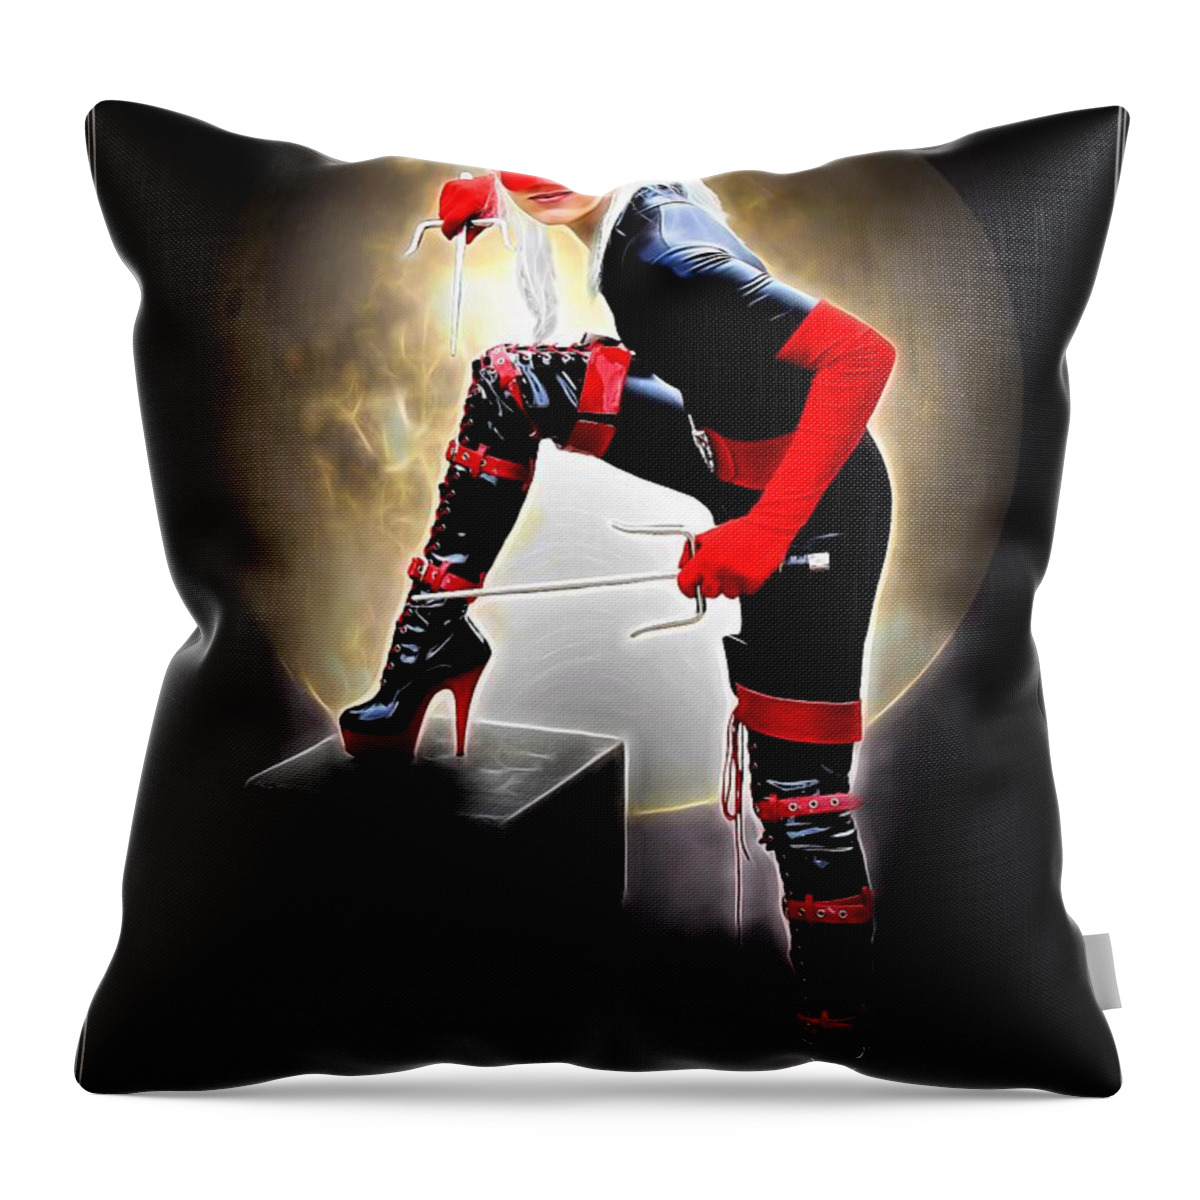 Fantasy Throw Pillow featuring the painting Night Of The Avenger by Jon Volden